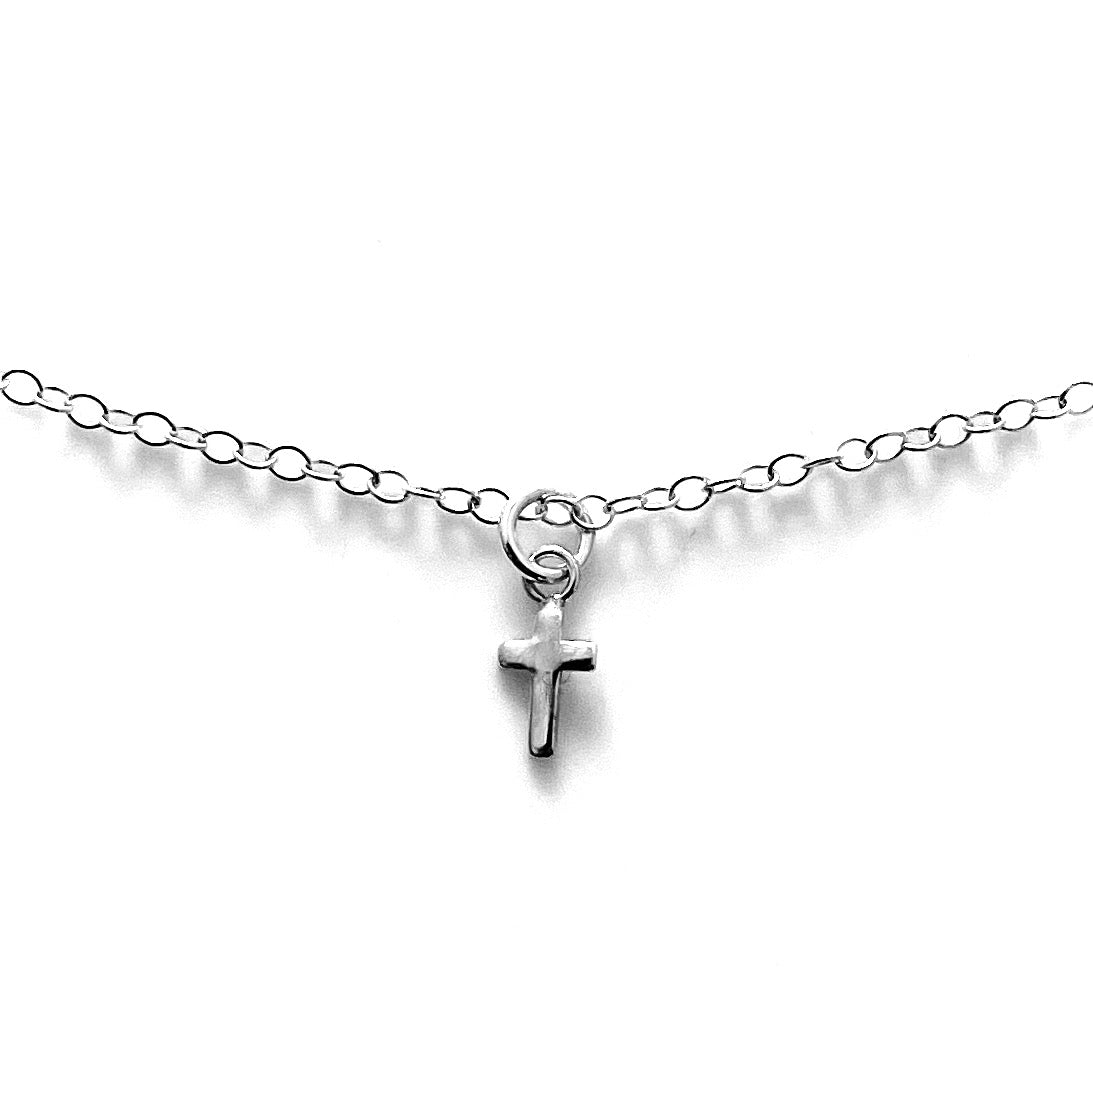 Eternal Grace: Cross Jewelry Collection - Discover Jewelry Blessed by Design